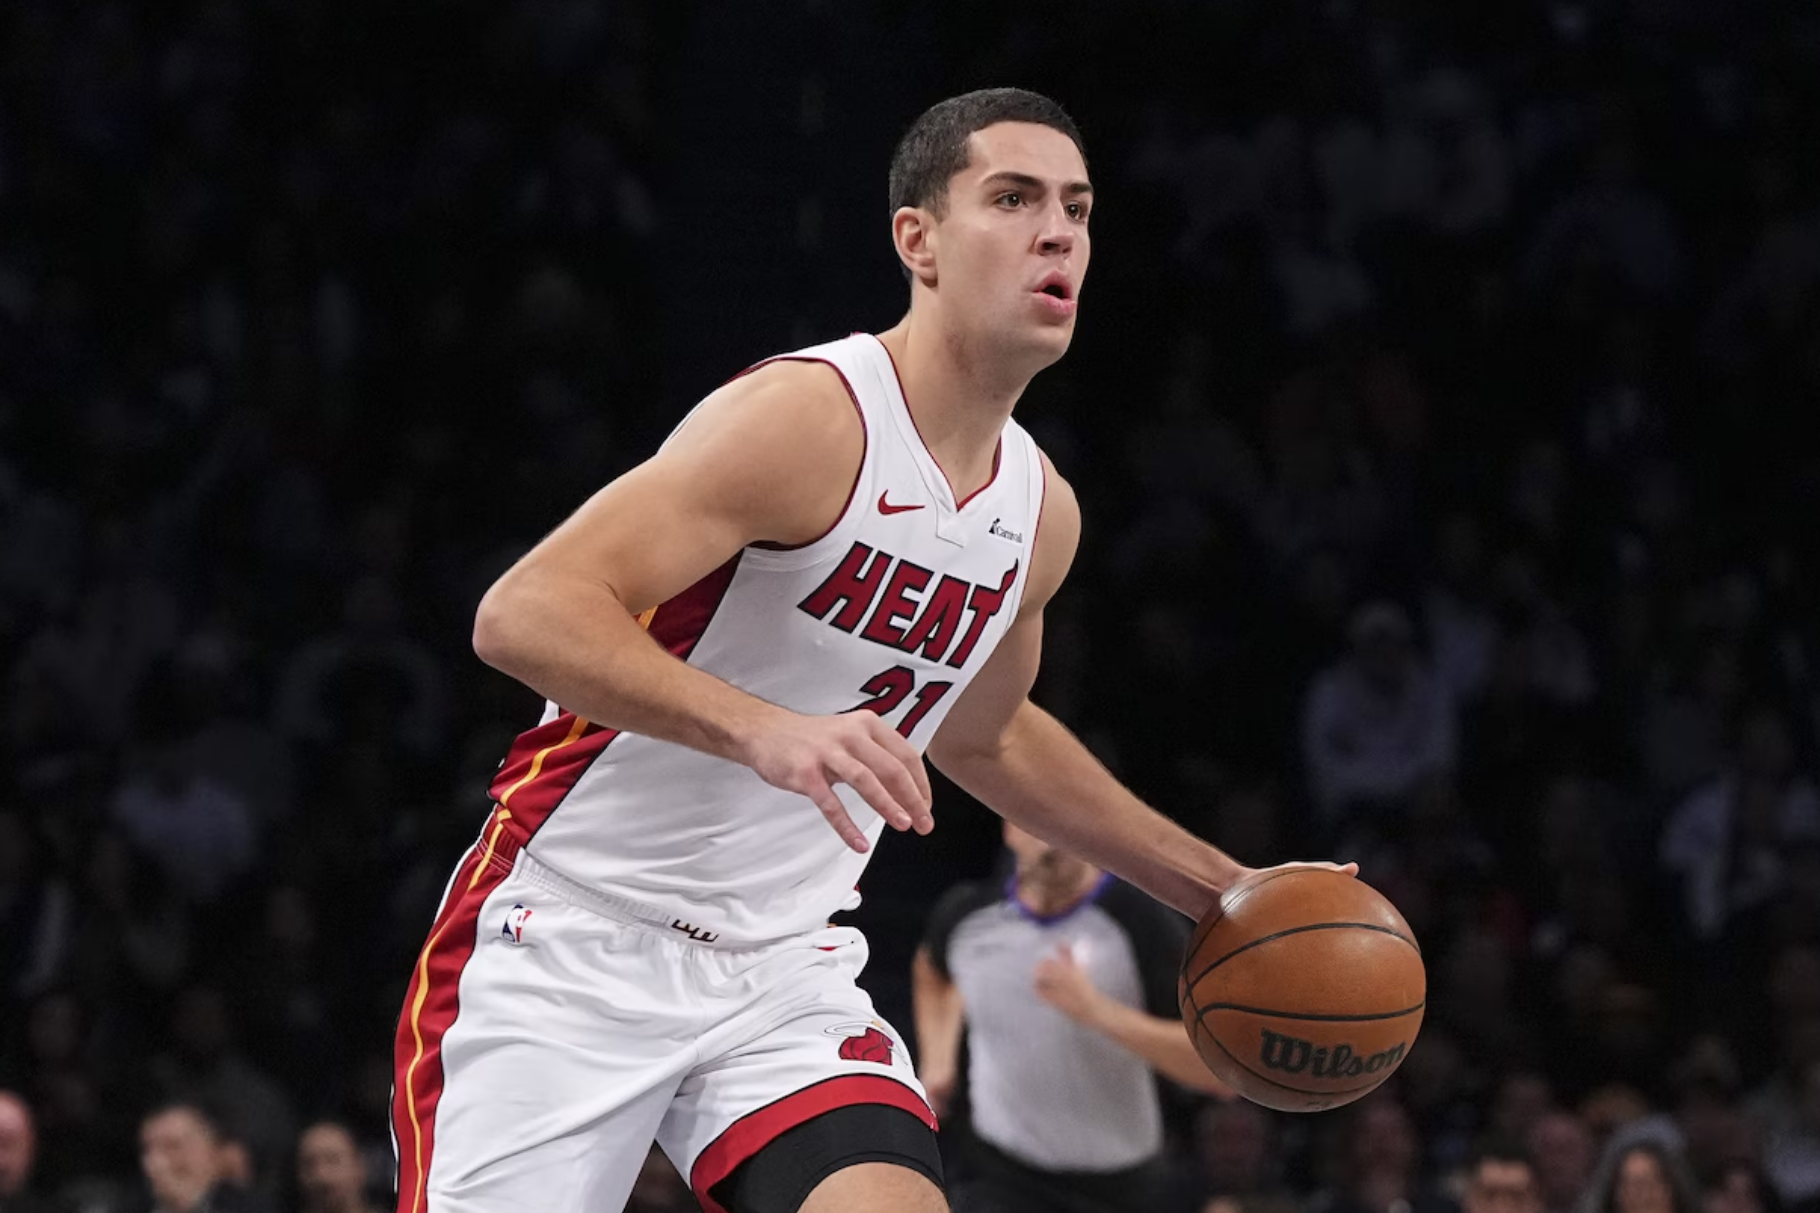 Miami Heat’s Rising Star: The Cole Swider Success Story